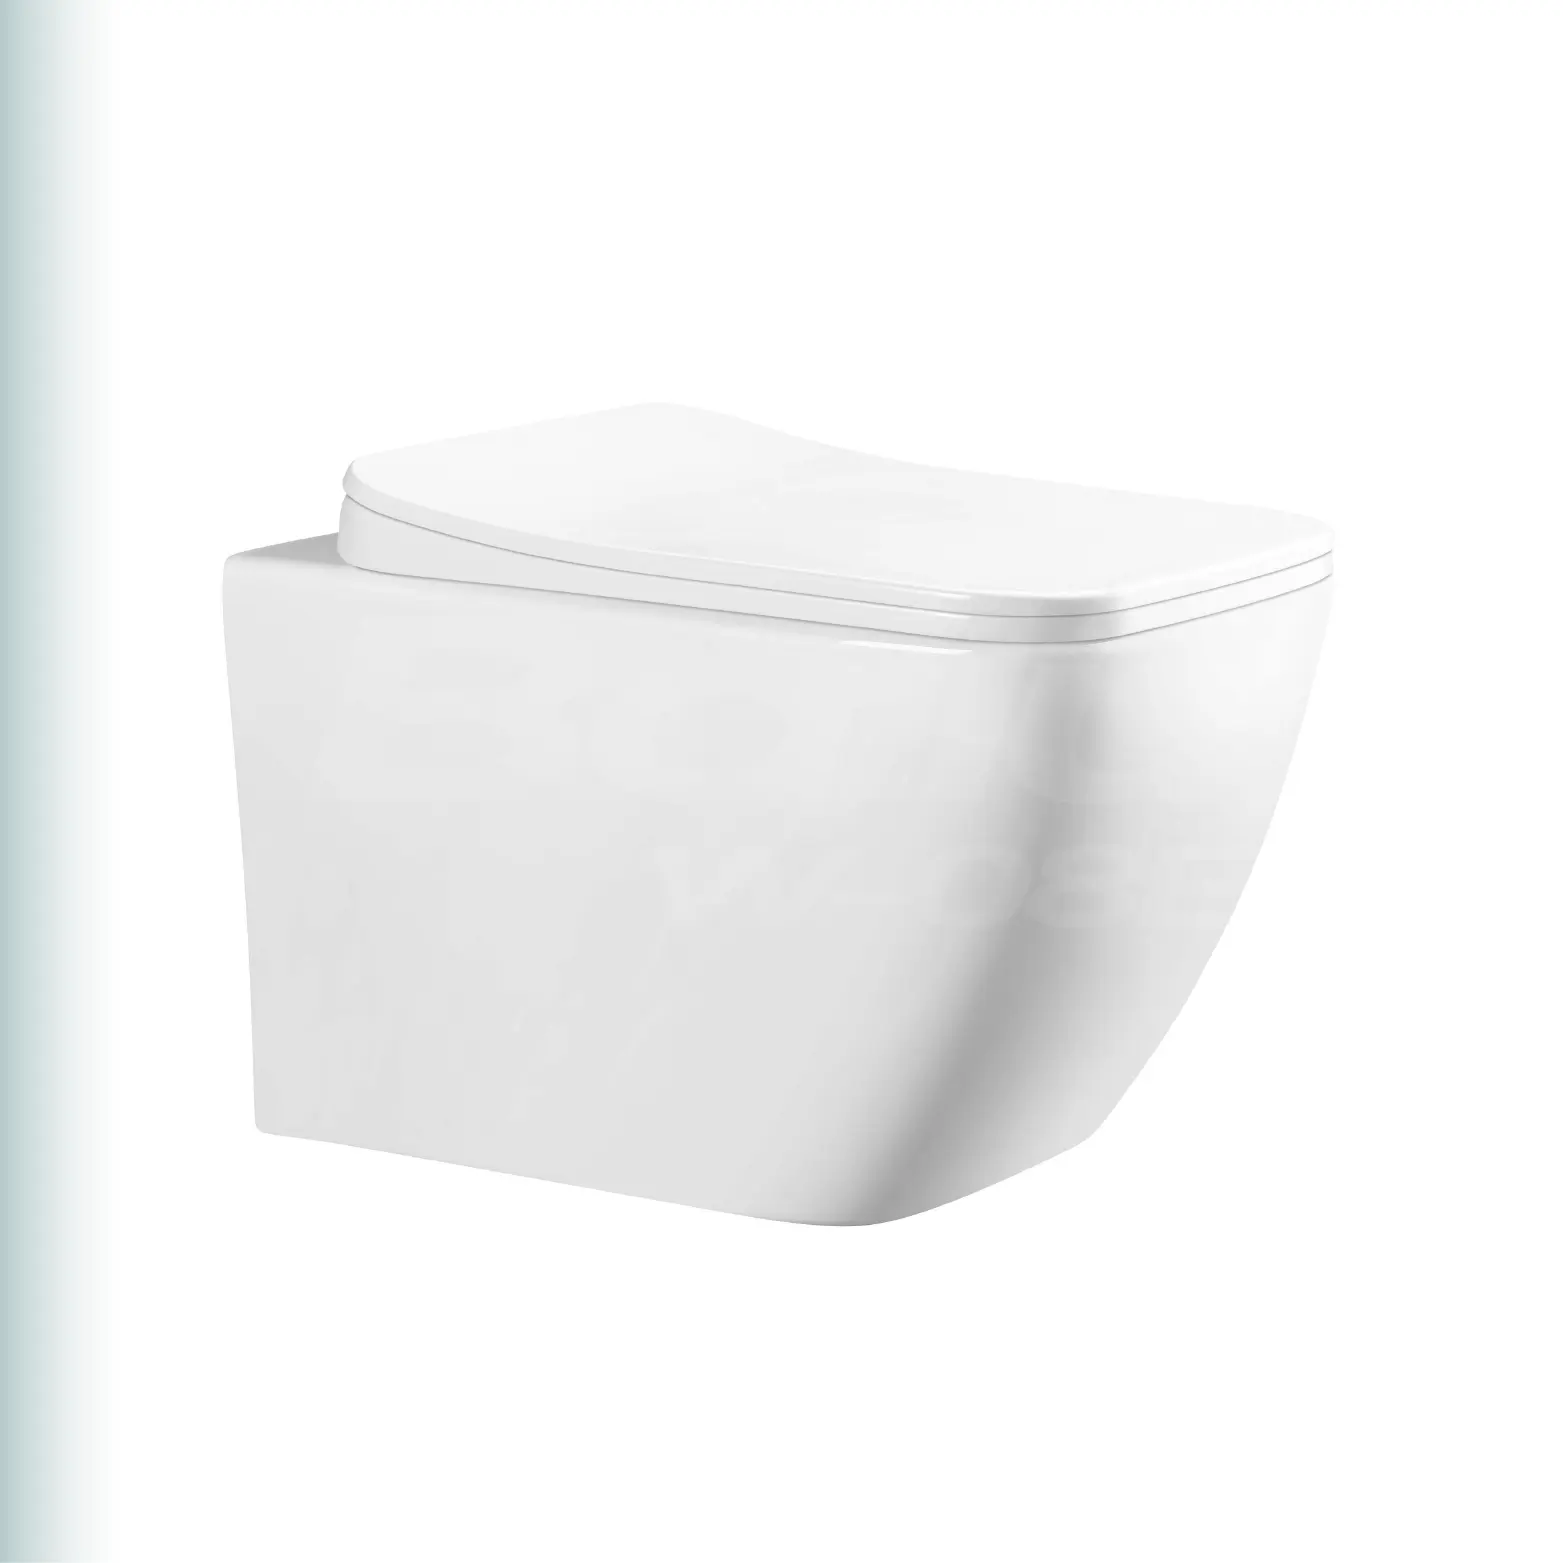 BAILU W-08E Unique Modern Aesthetic Rimless Square Wall-hung Toilet Bidet Set With Comfortable Seating UF Cover